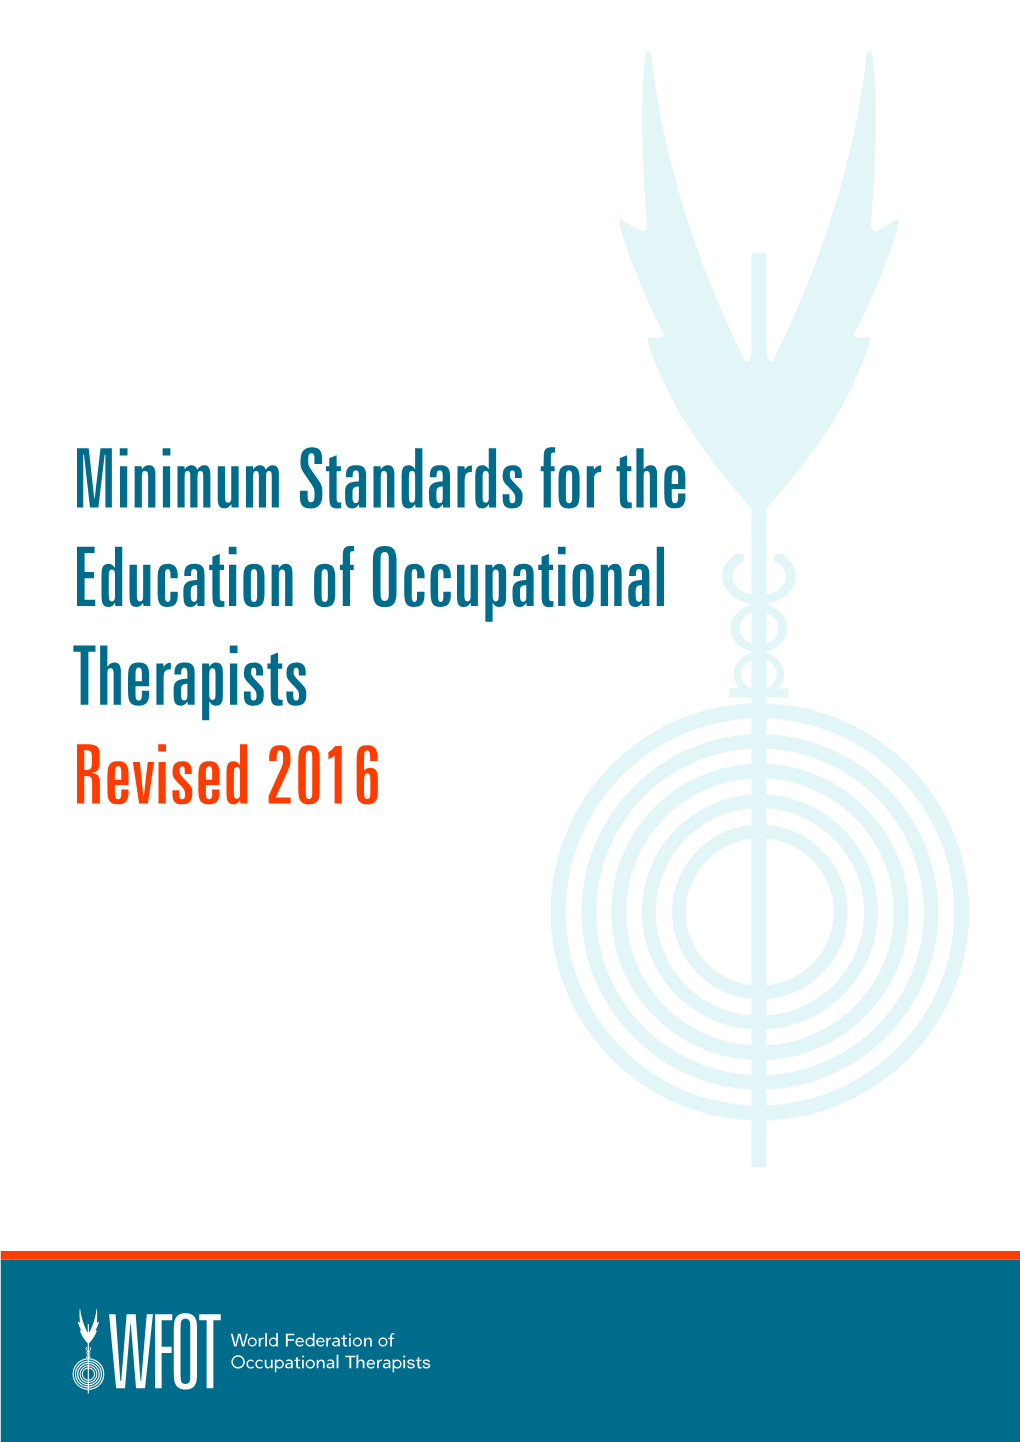 Minimum Standards for the Education of Occupational Therapists Revised 2016 Copyright Statement